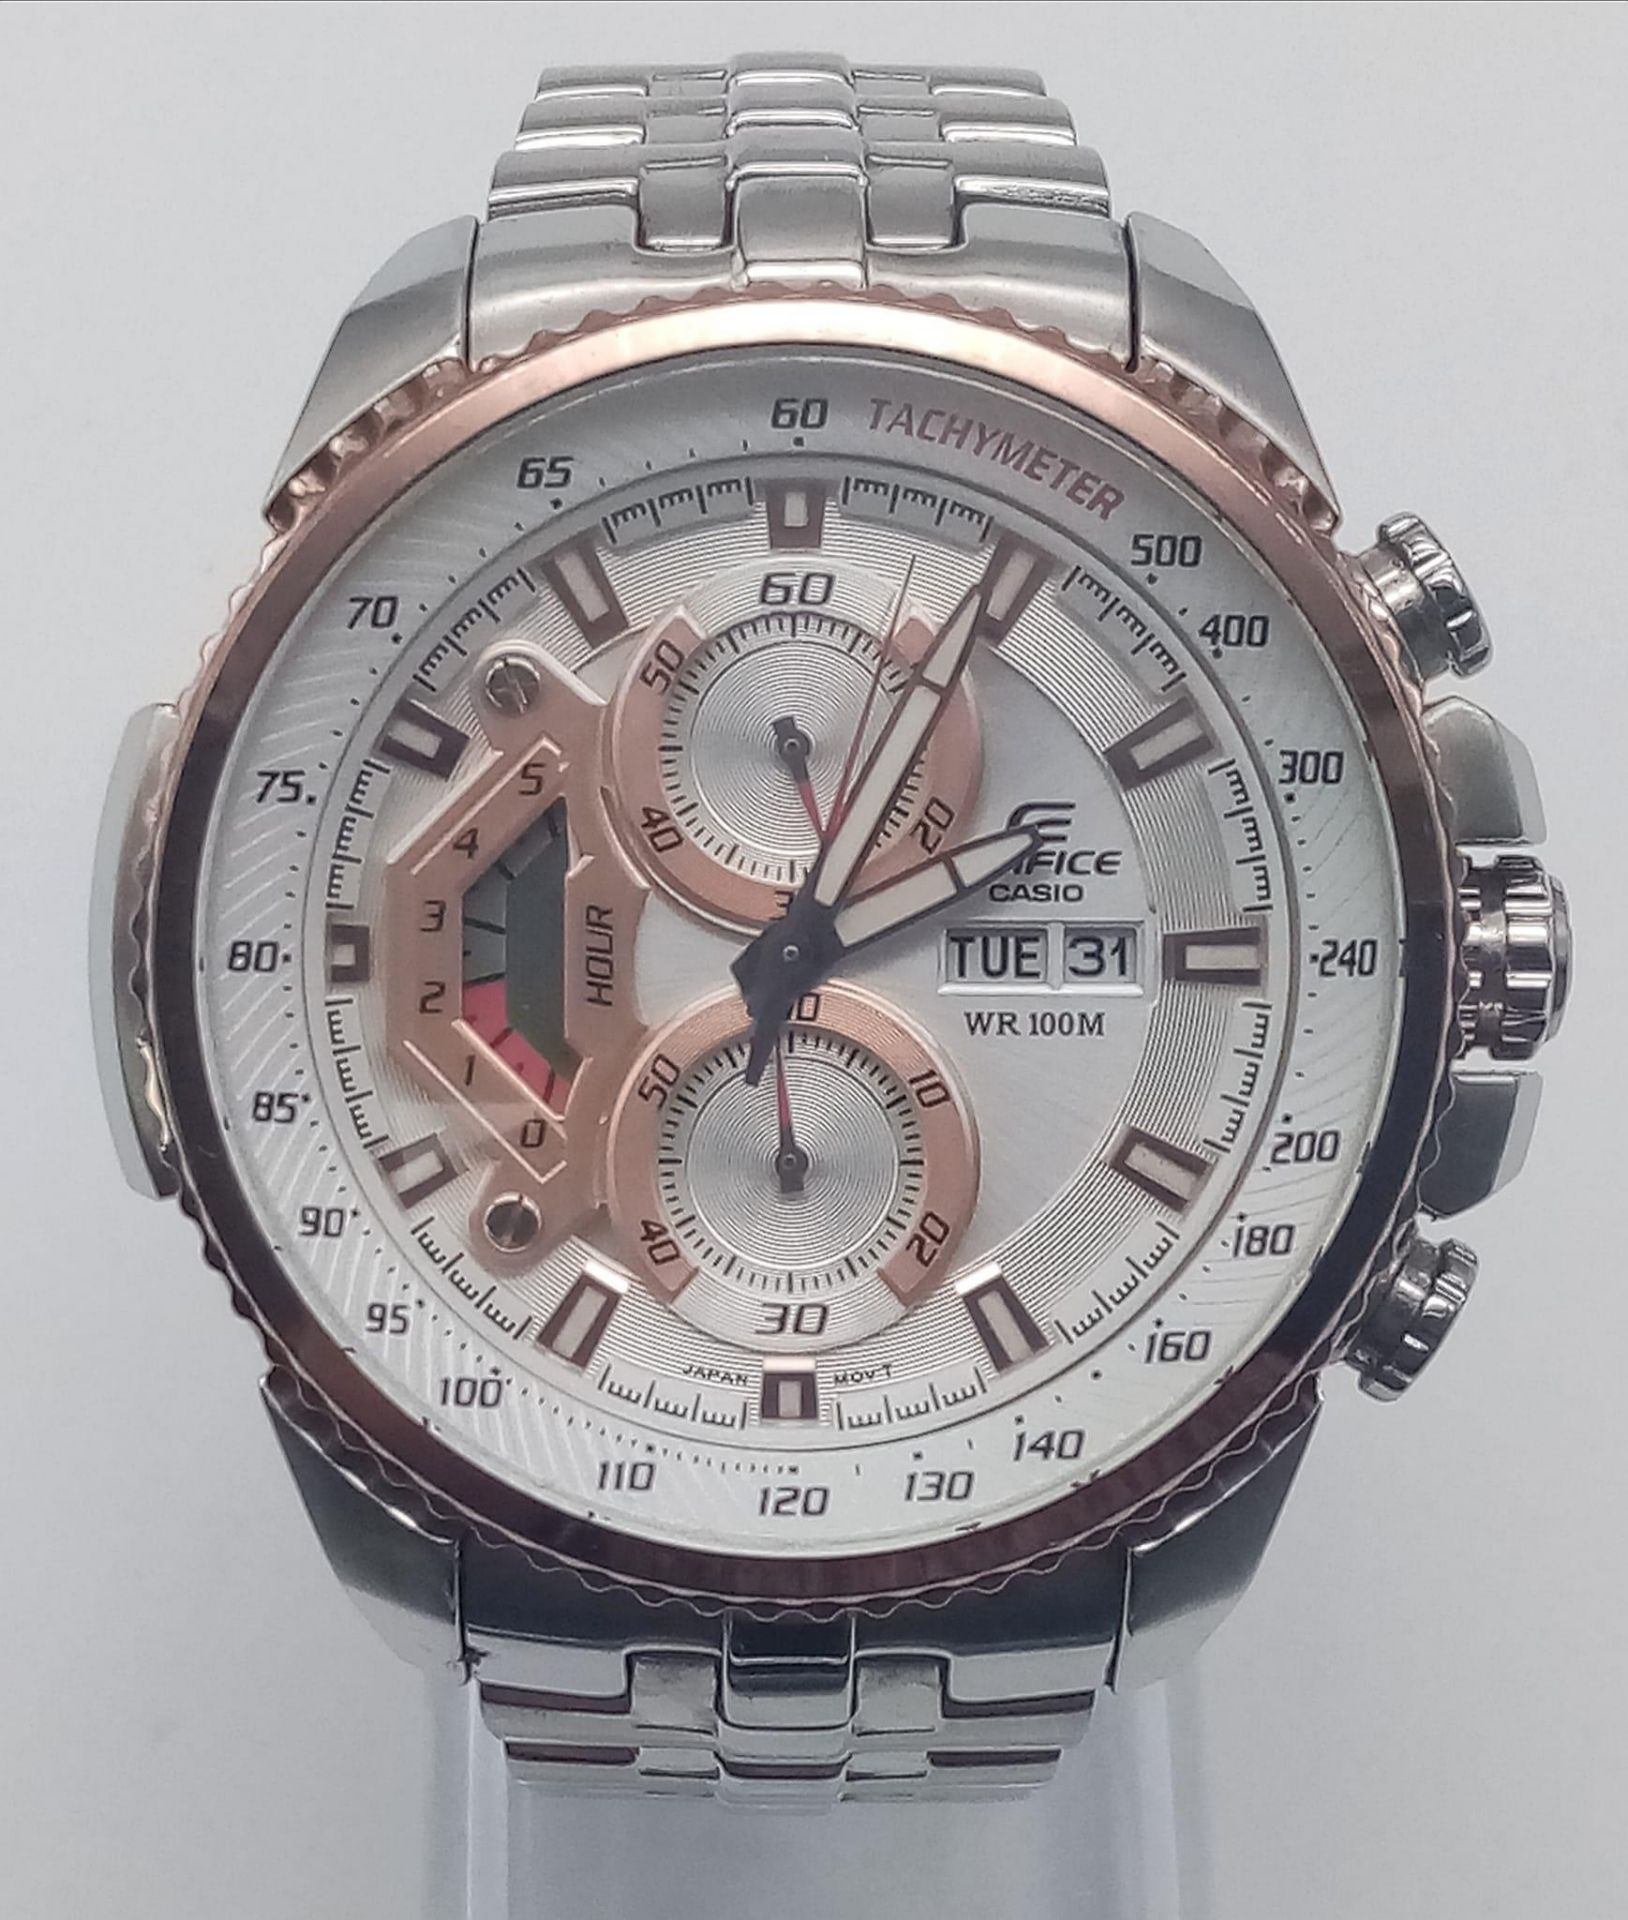 A Very Good Condition, Stainless-Steel, Men’s Casio Edifice Date-Date Sports Watch. 50mm Including